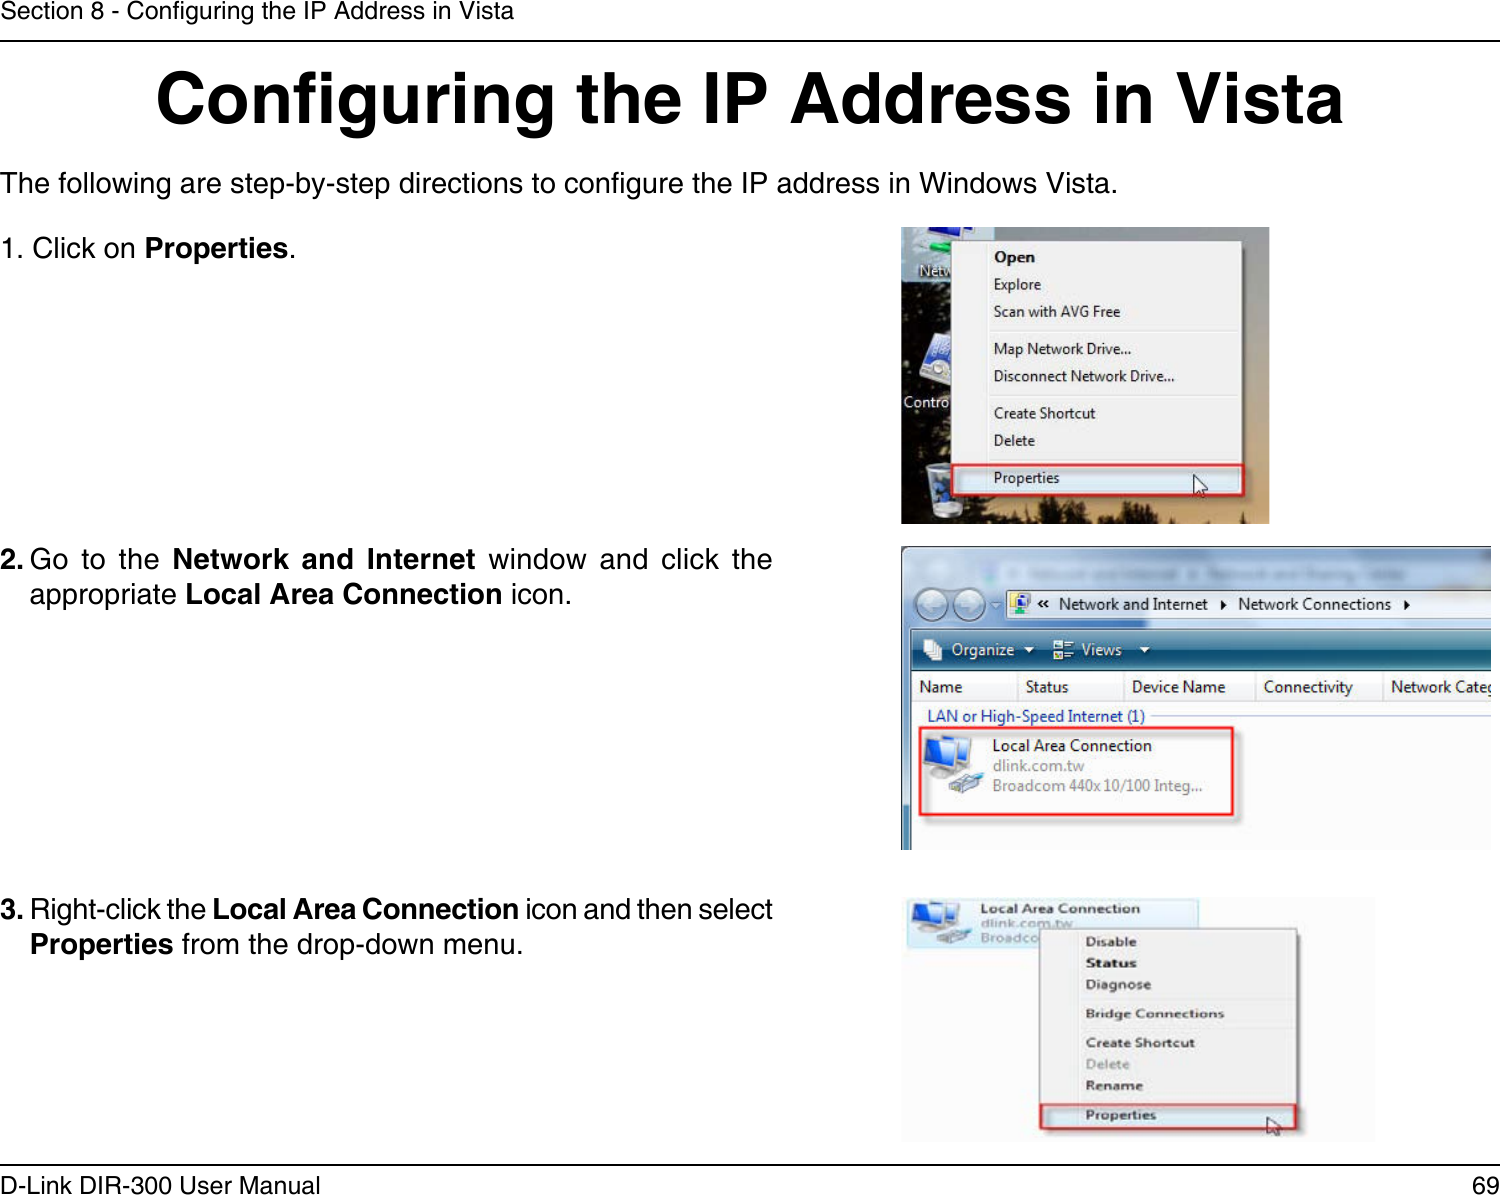 69D-Link DIR-300 User ManualSection 8 - Conguring the IP Address in VistaConguring the IP Address in VistaThe following are step-by-step directions to congure the IP address in Windows Vista.    2. Go  to  the  Network  and  Internet  window  and  click  the appropriate Local Area Connection icon. 1. Click on Properties.     3. Right-click the Local Area Connection icon and then select Properties from the drop-down menu. 